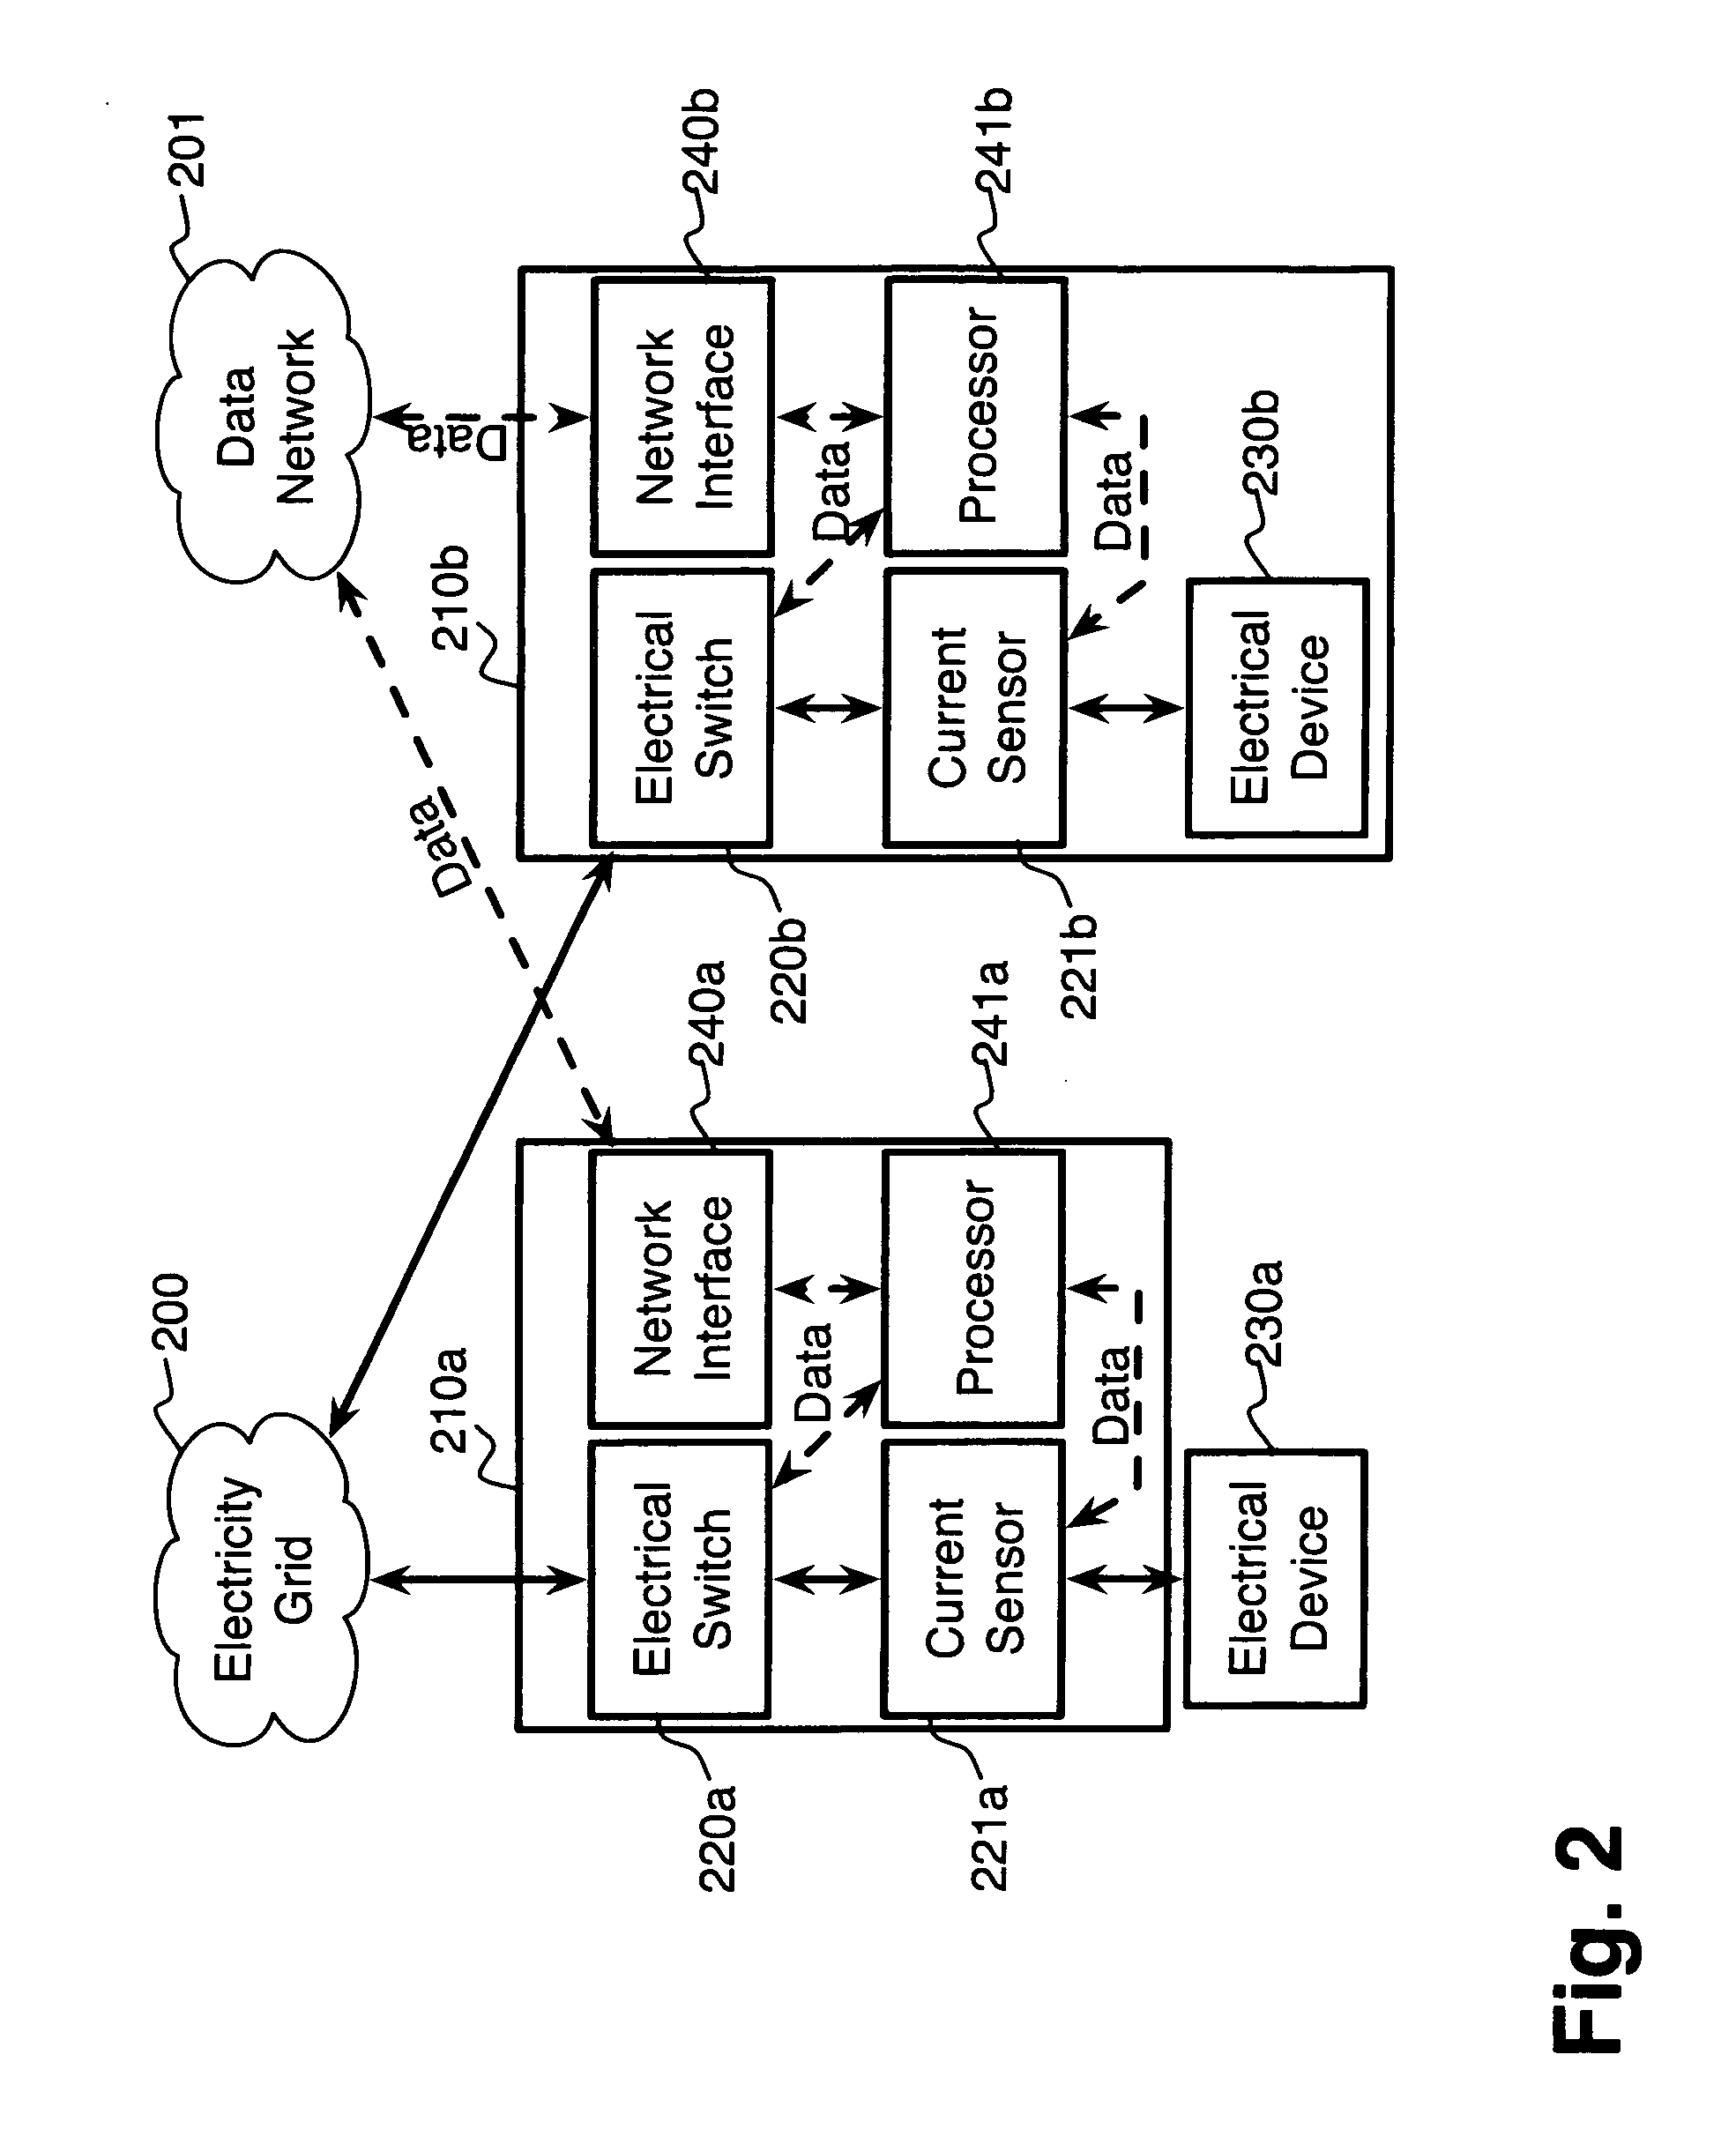 System and method for participation in energy-related markets